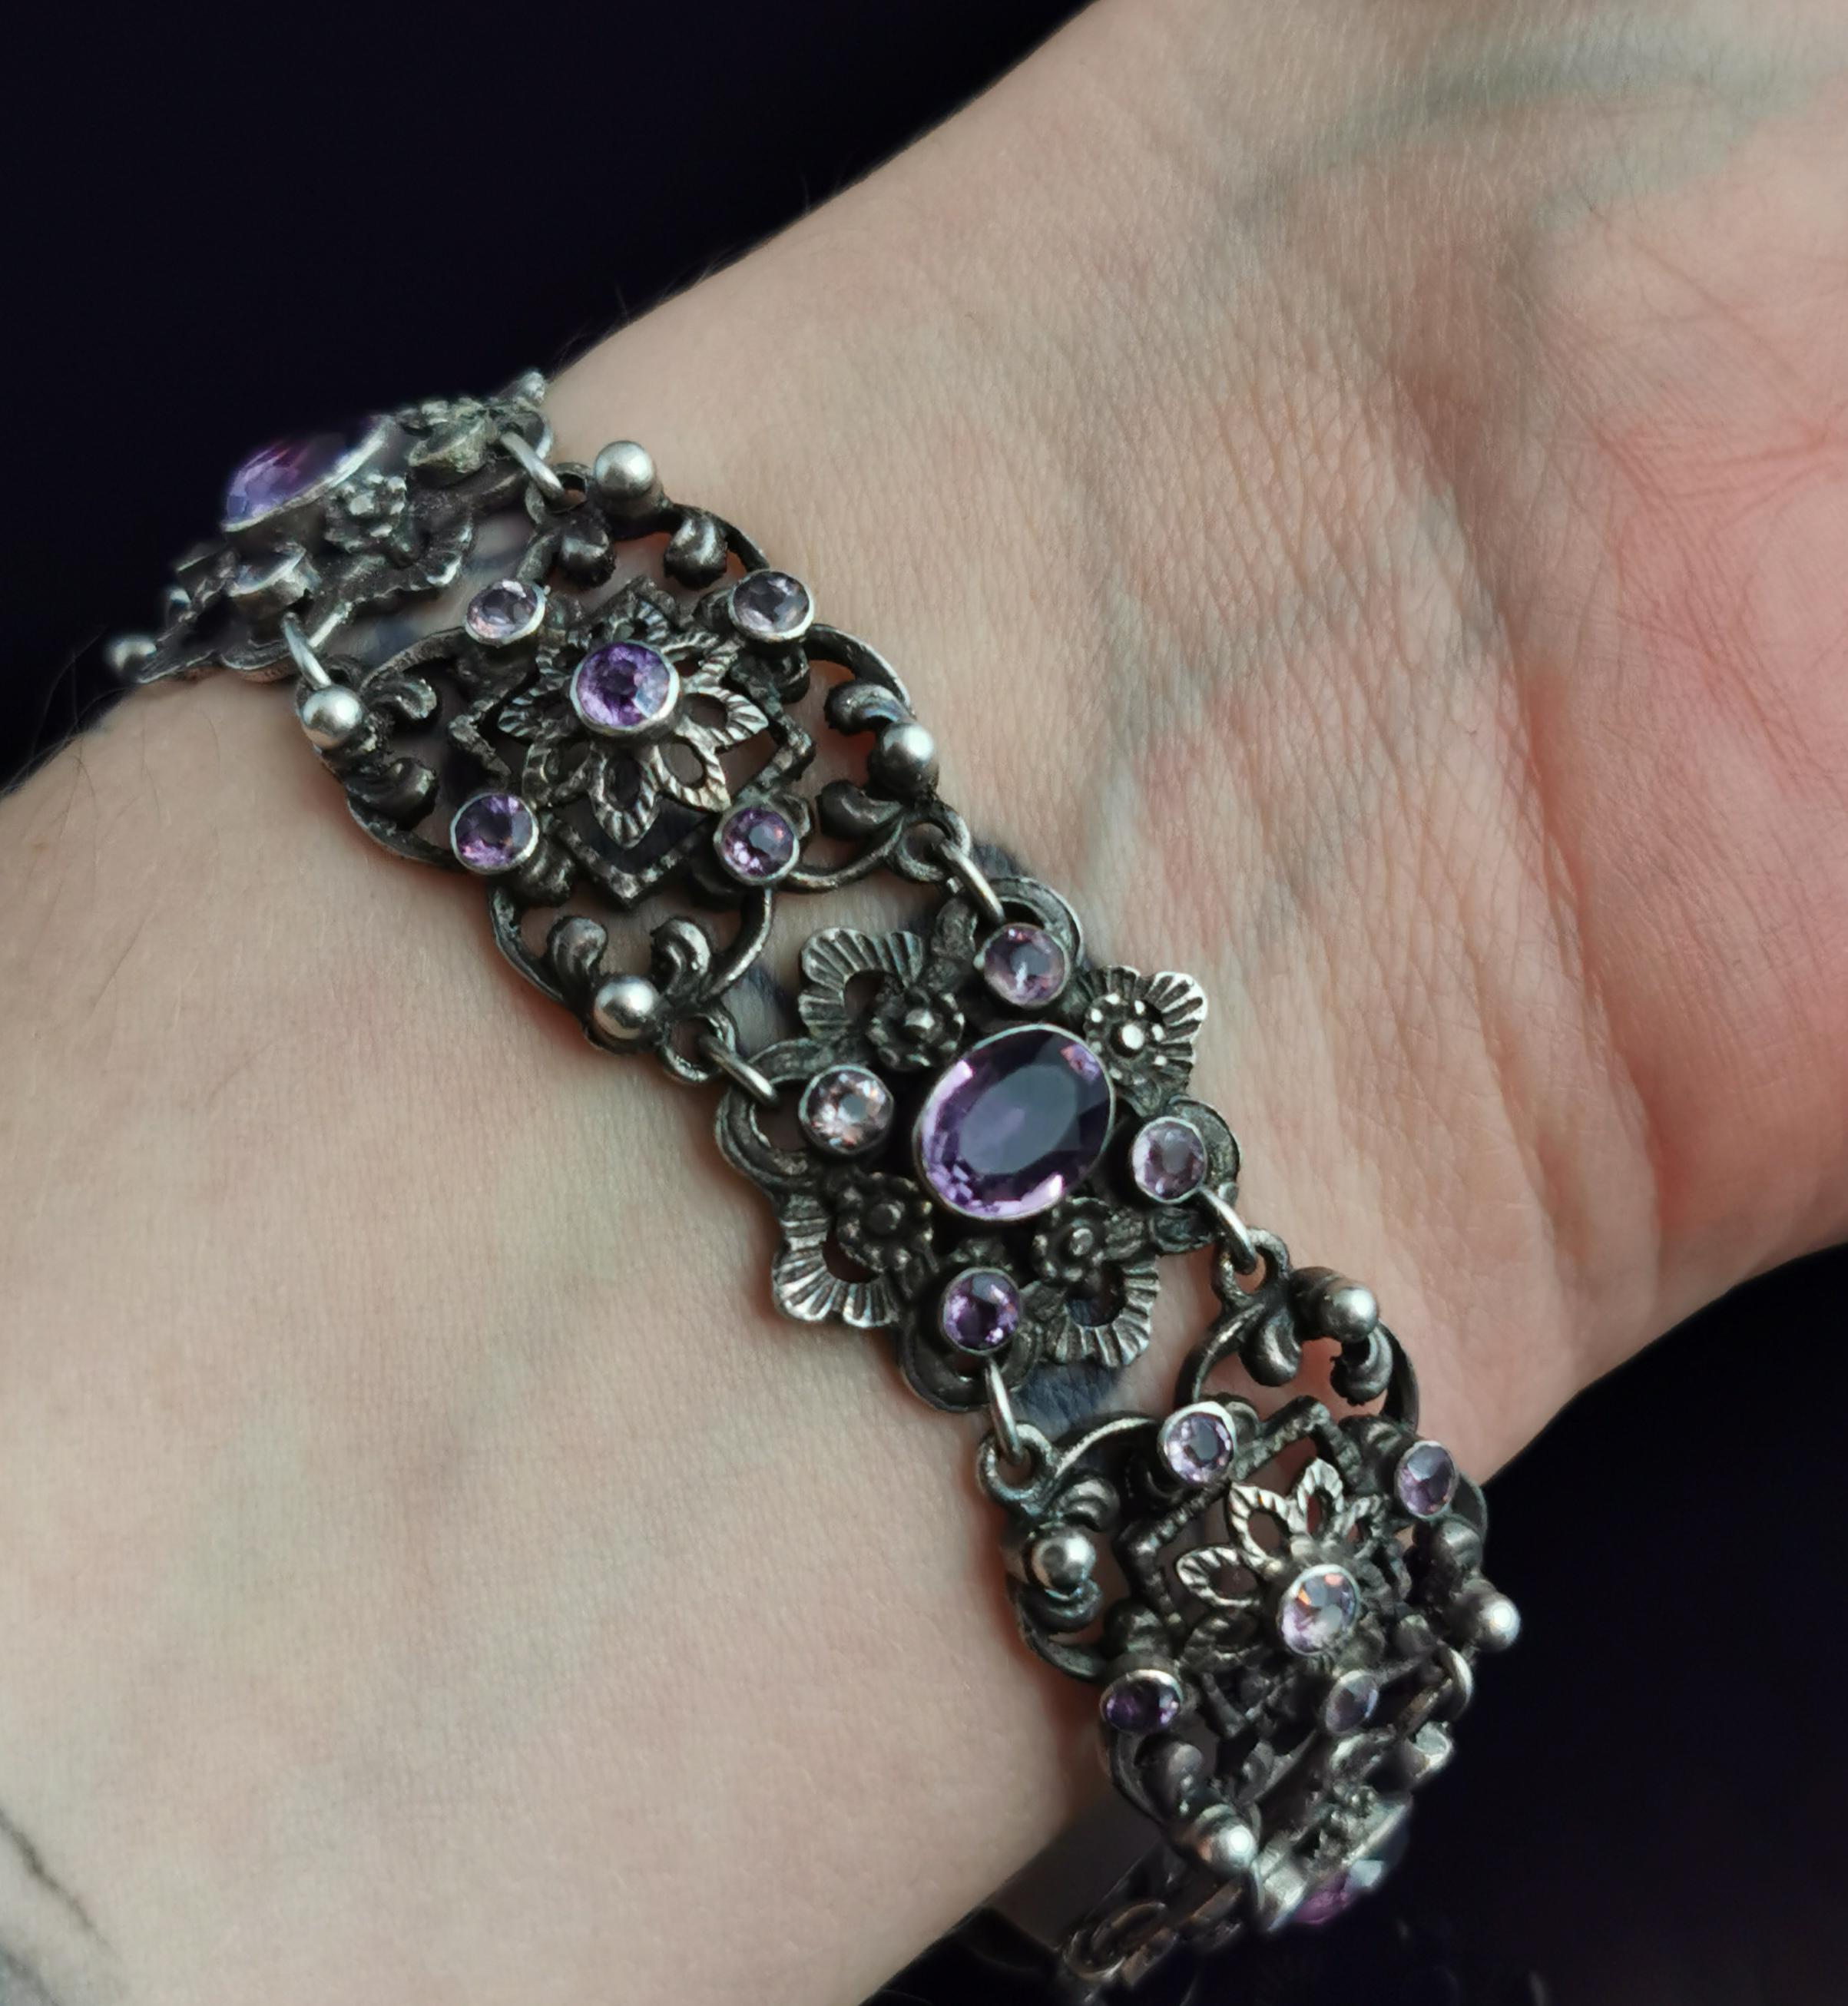 Women's Antique Arts & Crafts Silver and Amethyst Bracelet 